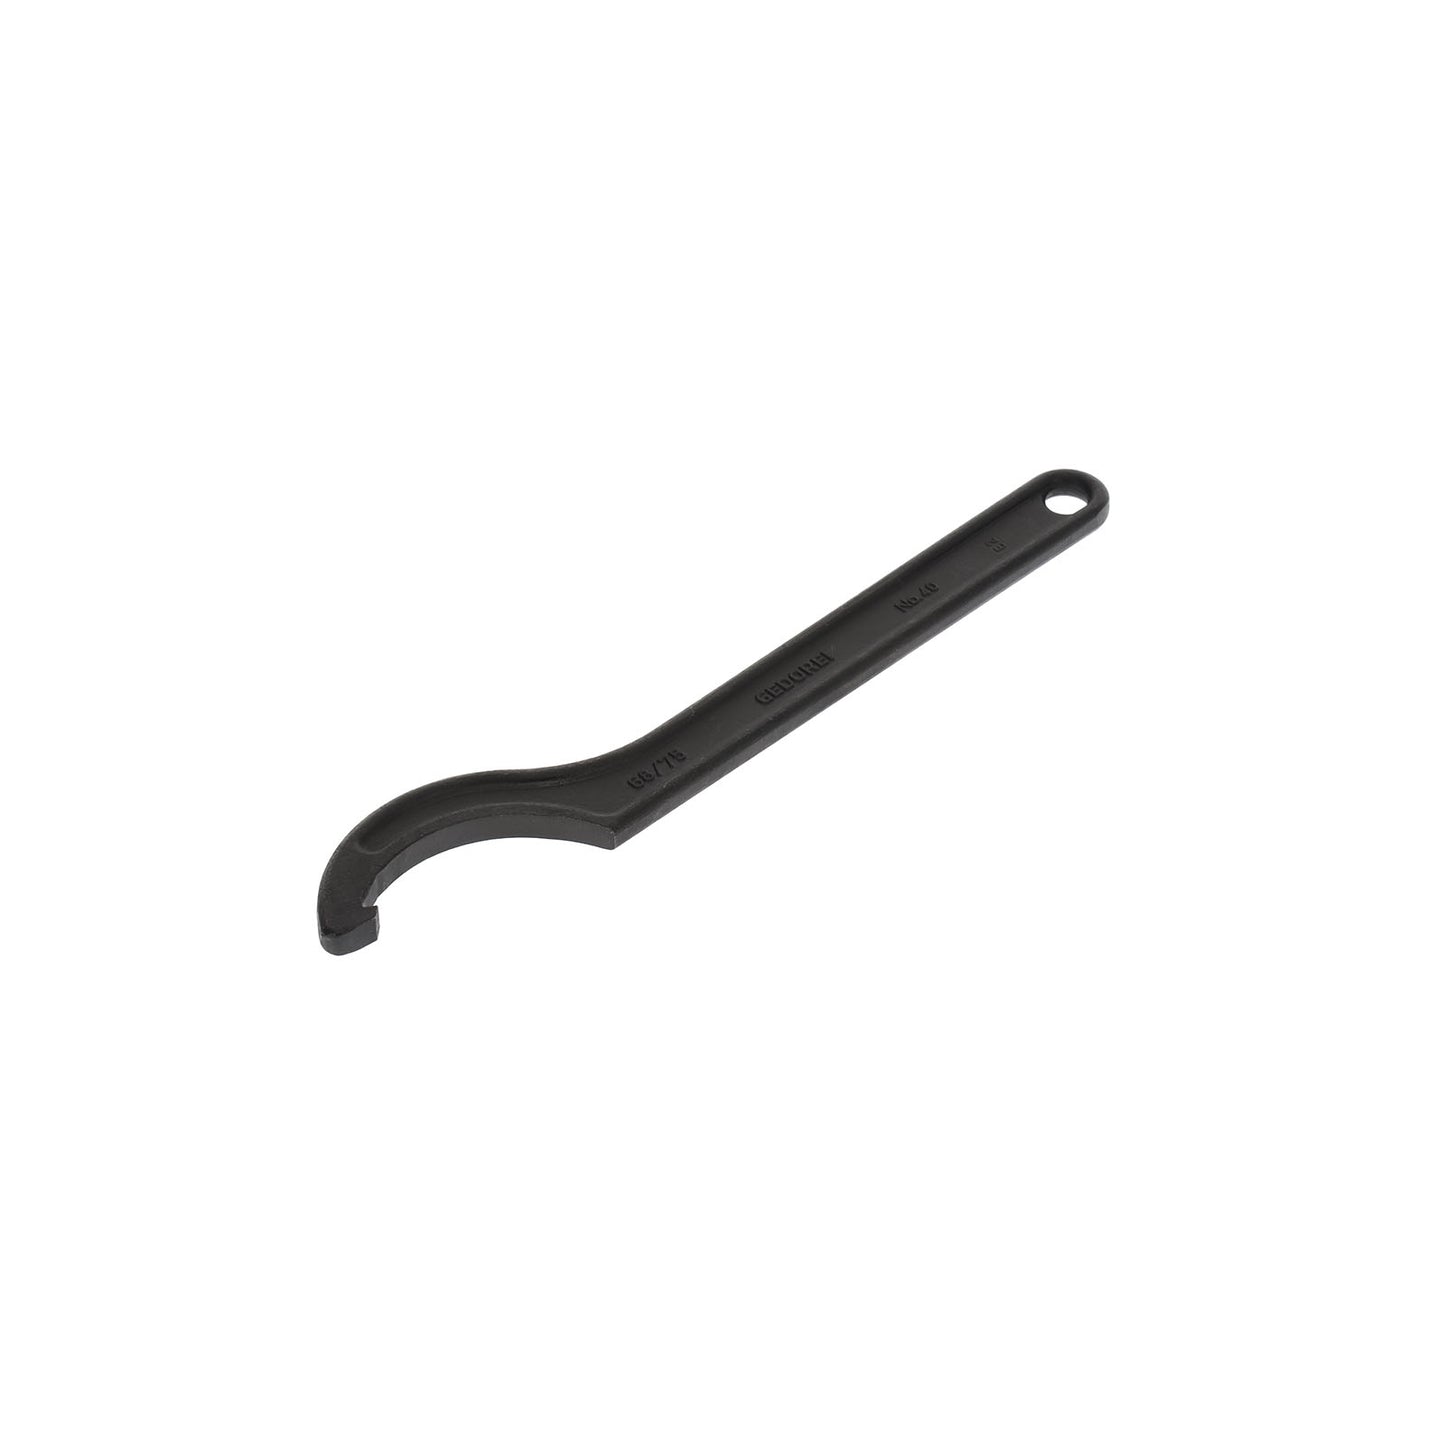 GEDORE 40 68-75 - Hook Wrench, 68-75 (6334880)